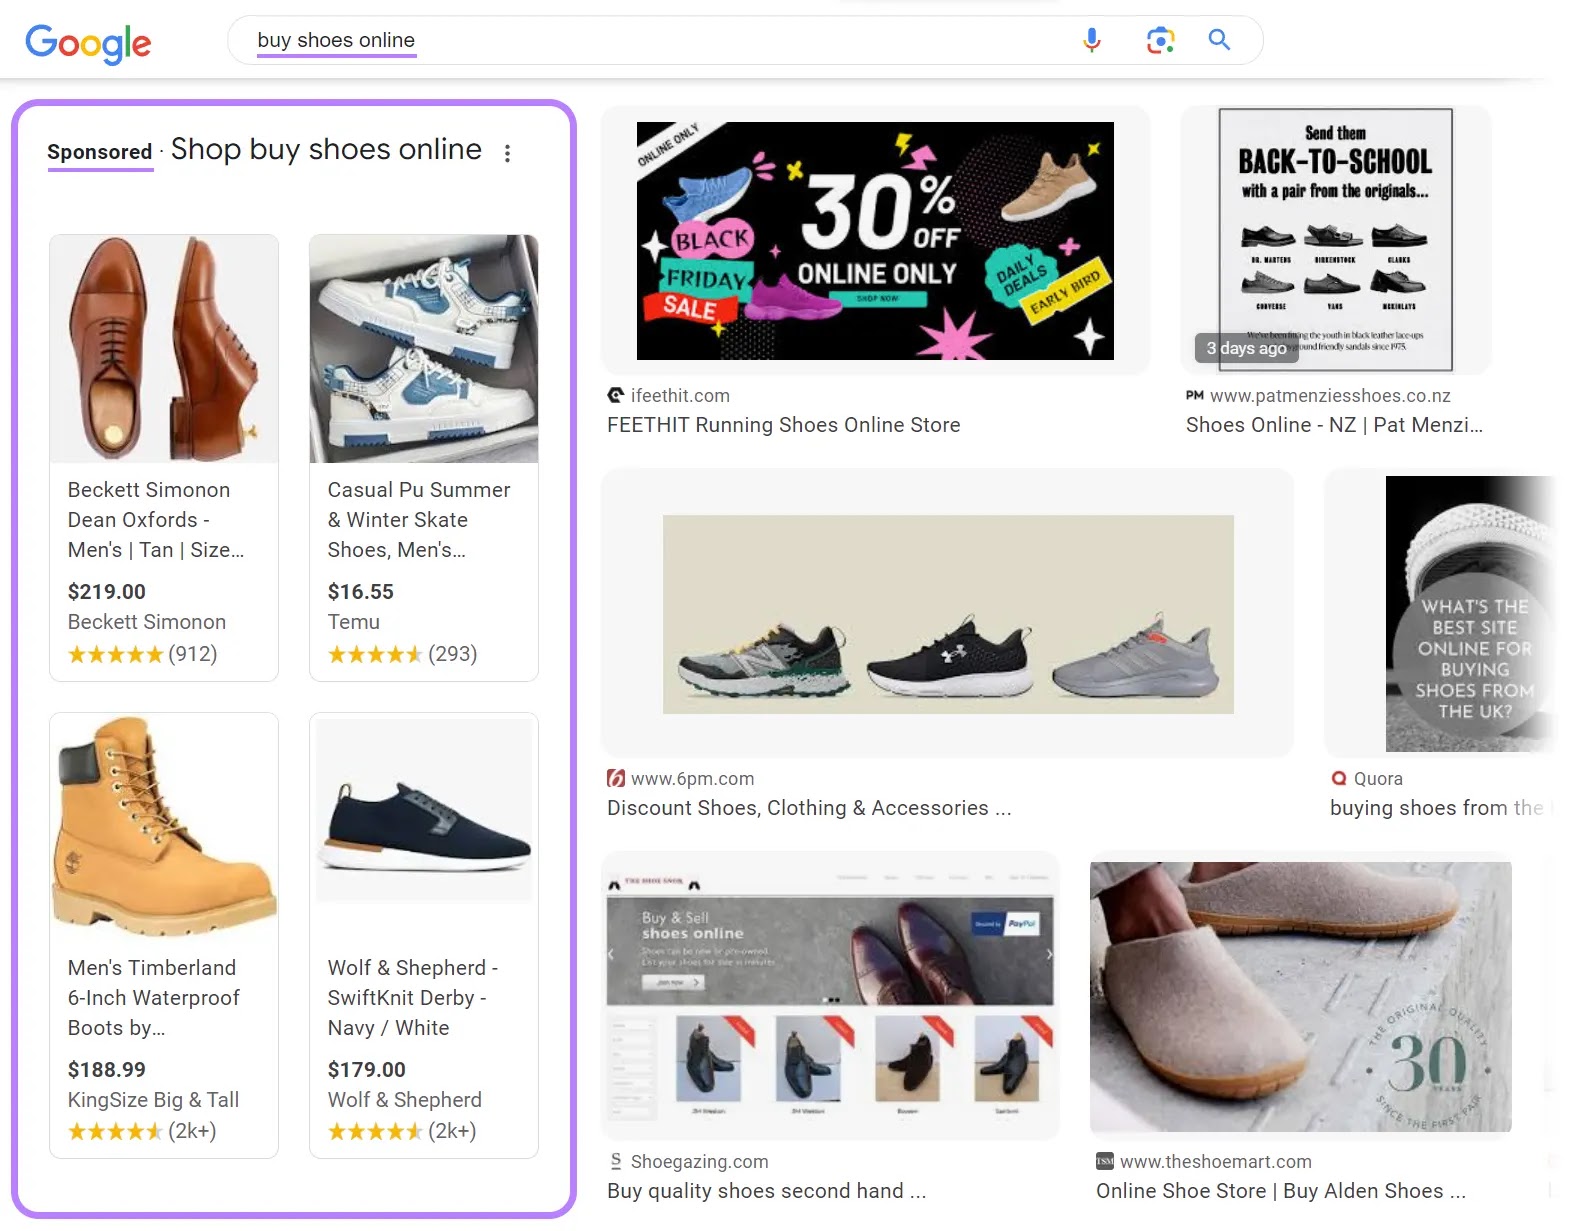 PLAs alongside image search results for "buy shoes online"